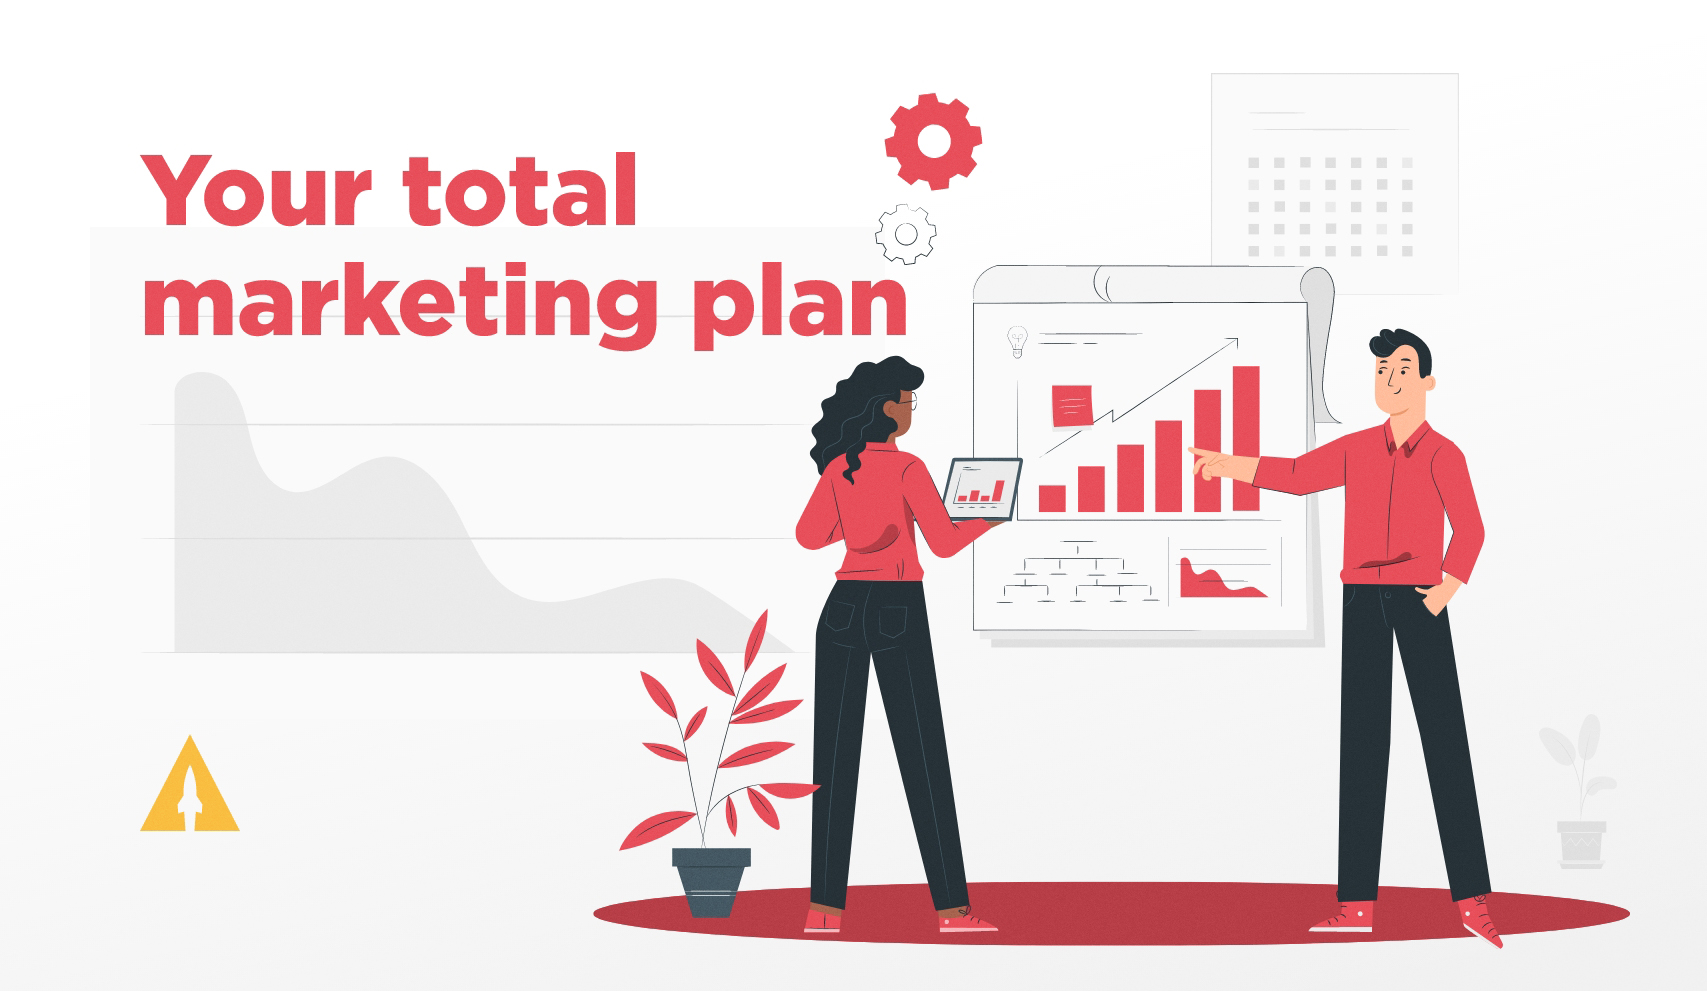 Your total marketing plan